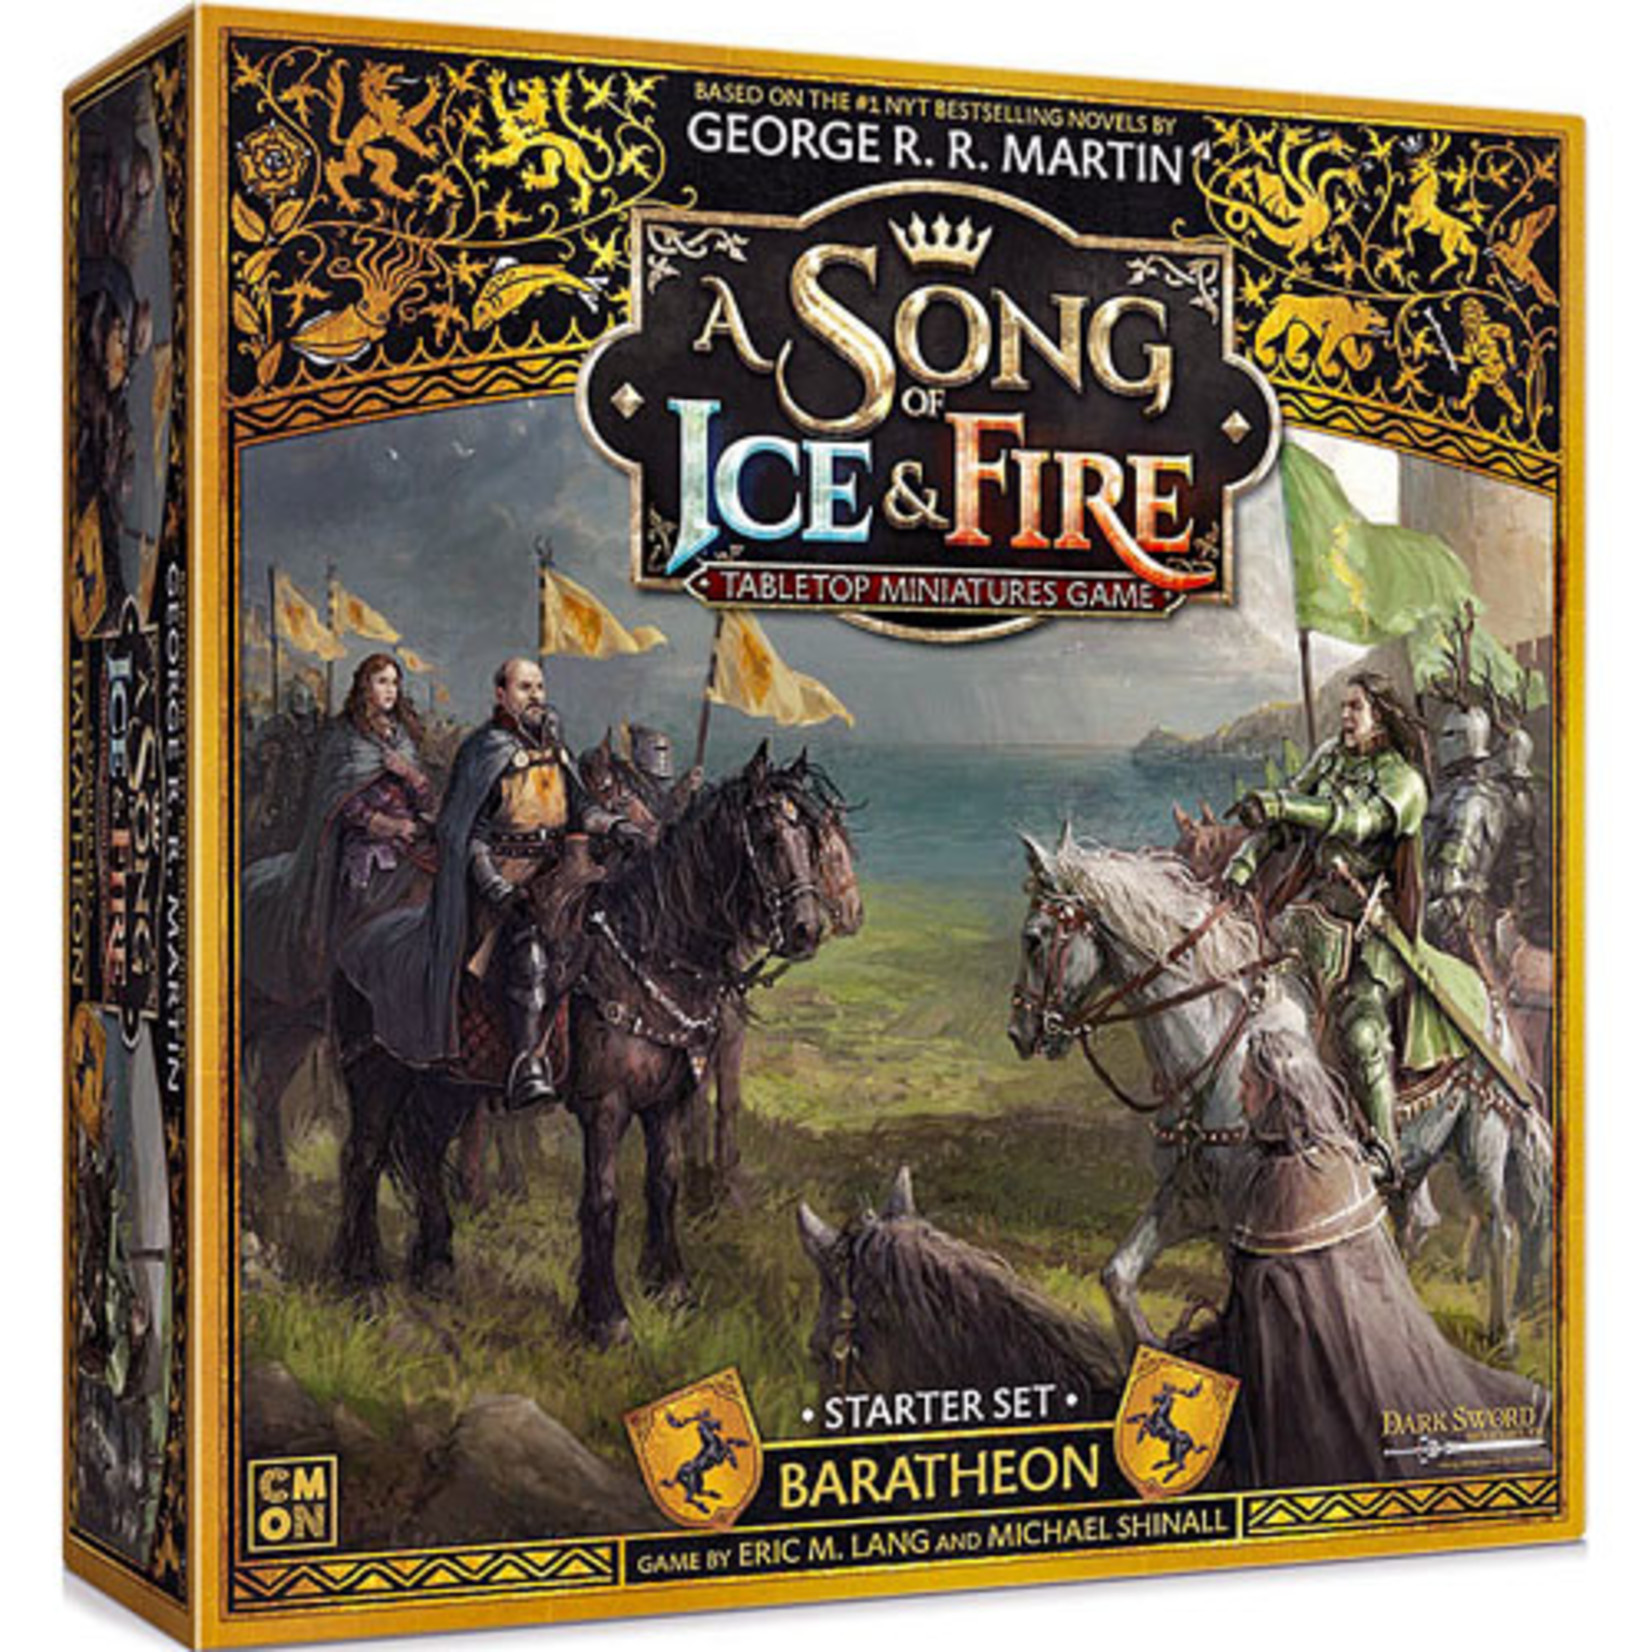 Baratheon Starter Set: A Song of Ice & Fire Tabletop Miniatures Game: